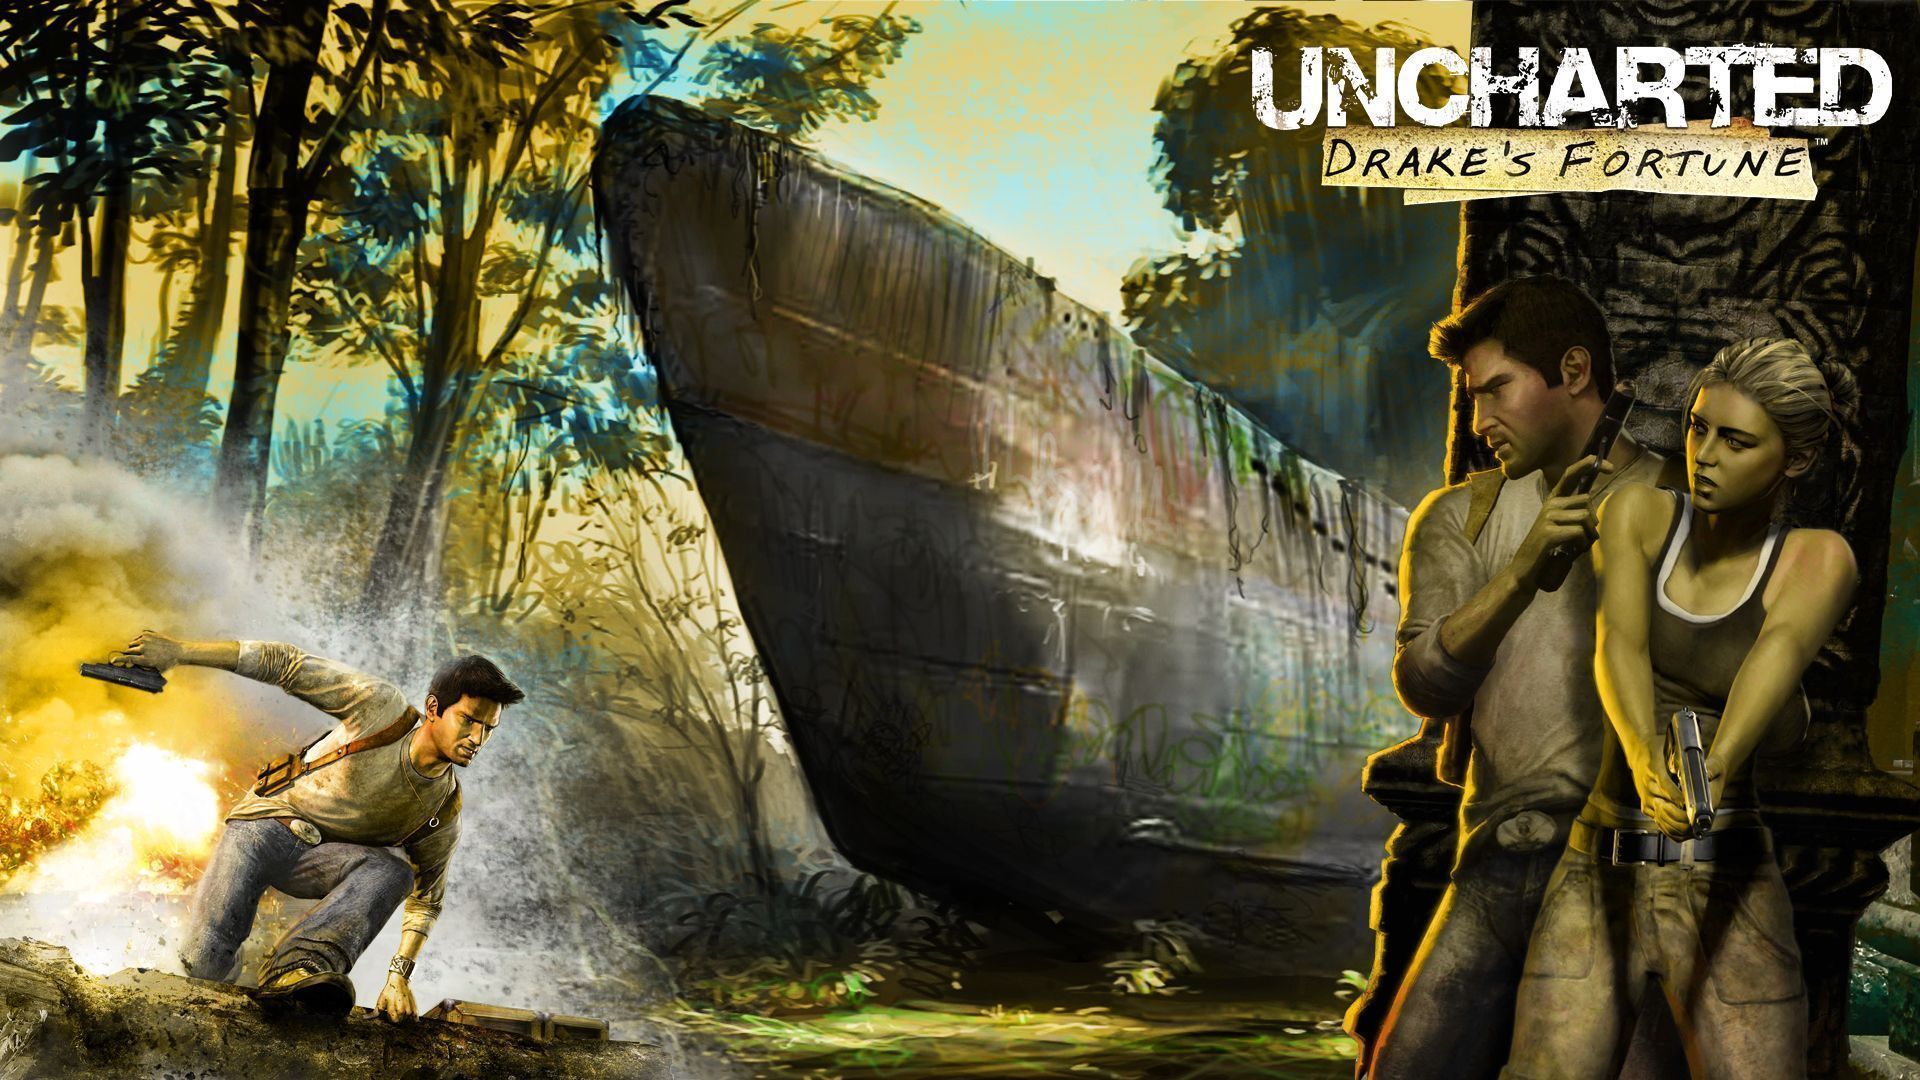 Uncharted drakes fortune 1335